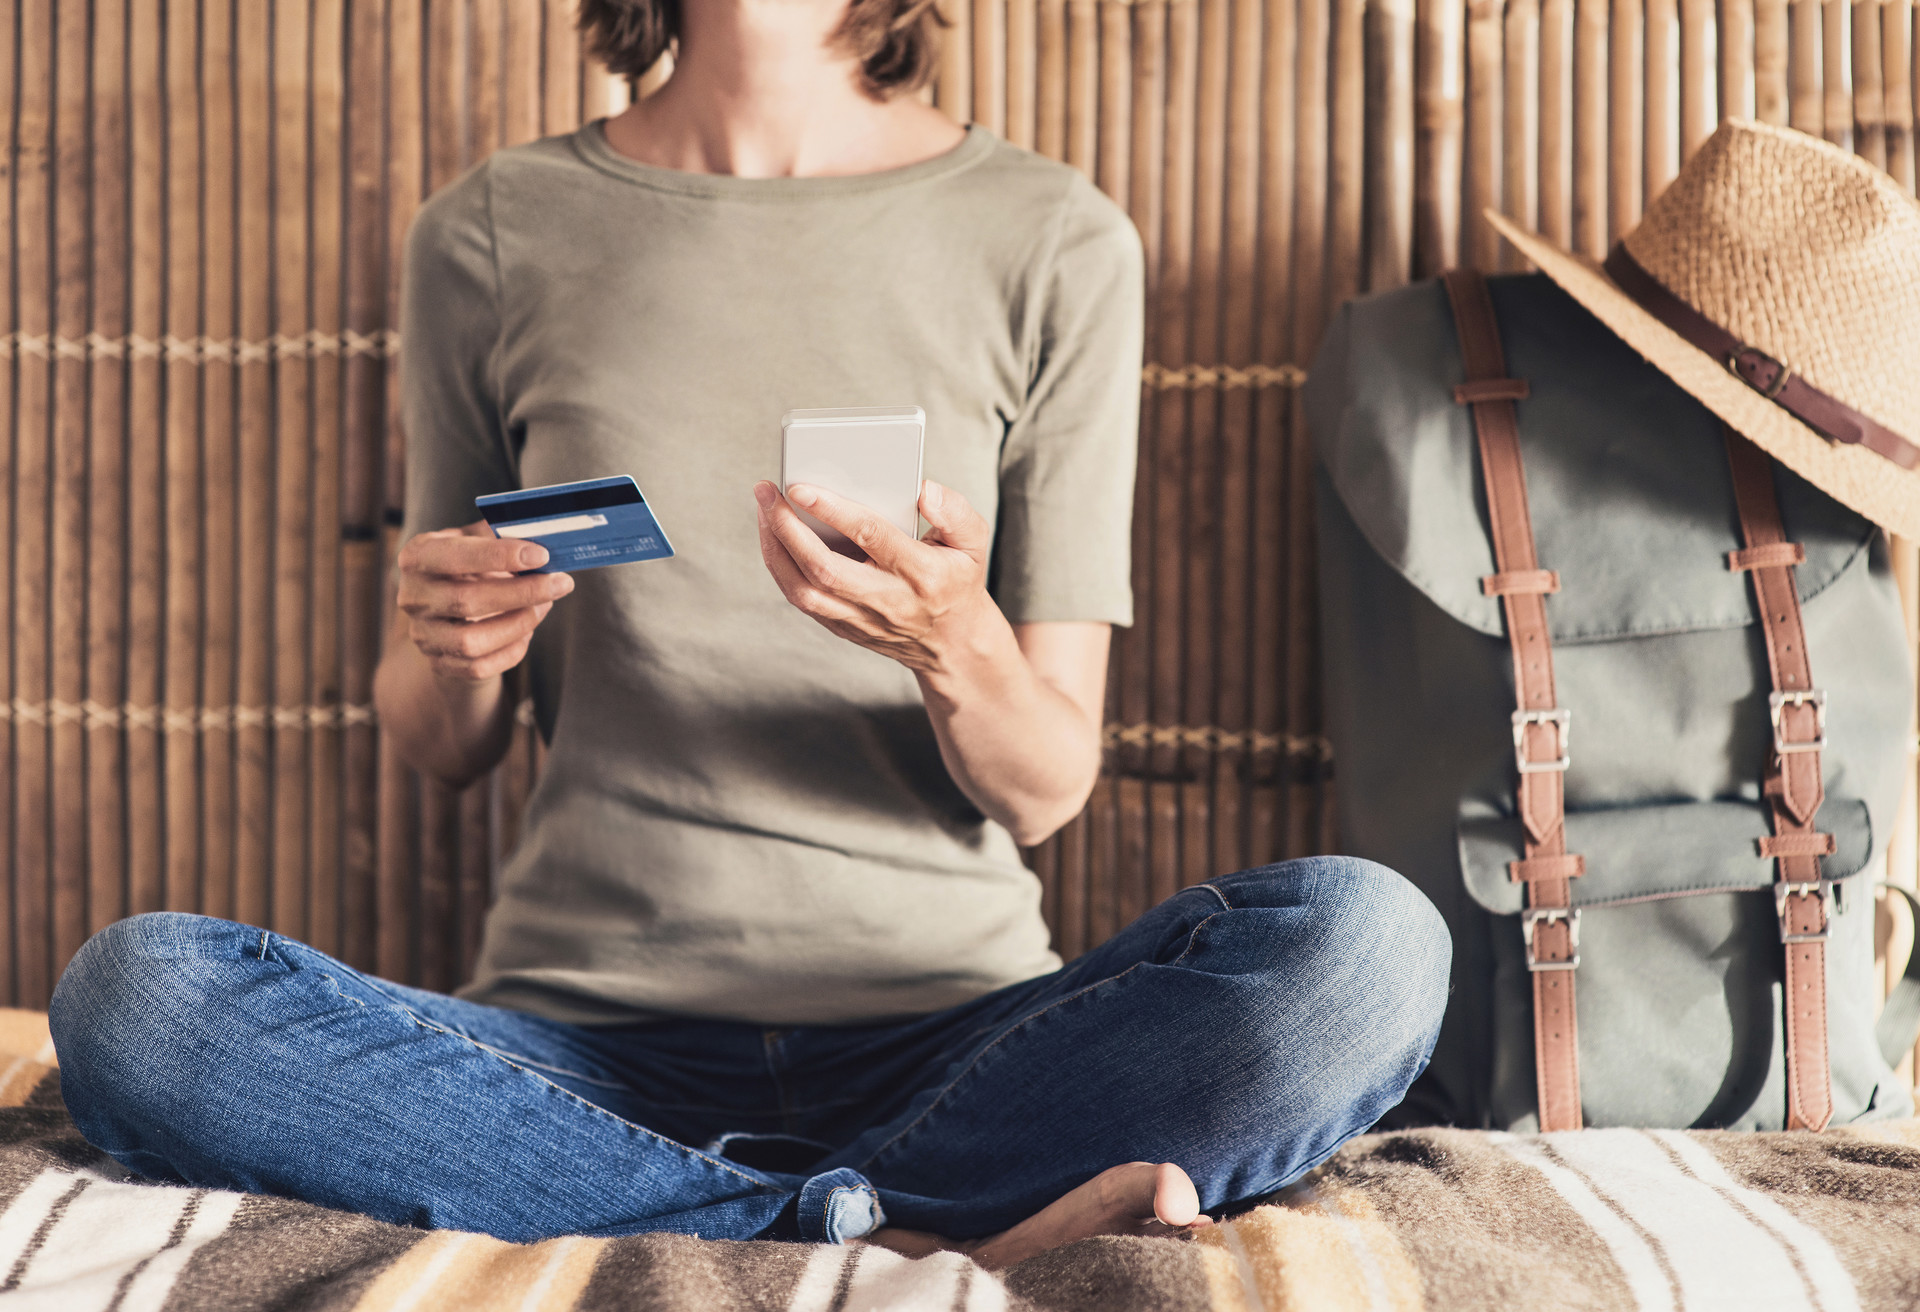 Young woman on vacations using phone and credit card. Online shopping concept